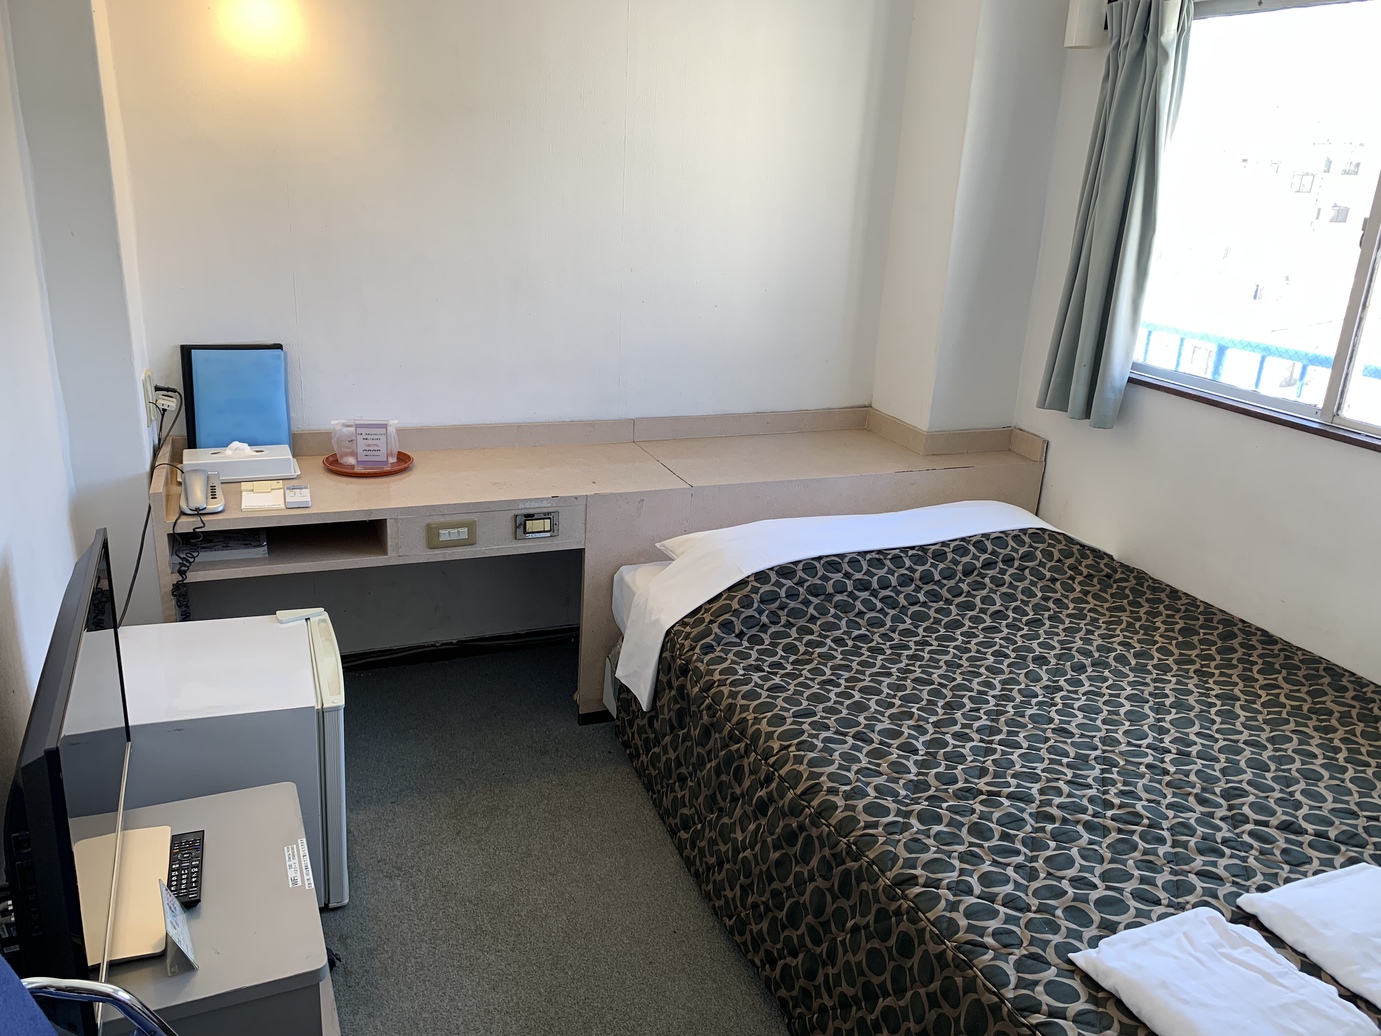 Okinawa Oriental Hotel Stop at Okinawa Oriental Hotel to discover the wonders of Okinawa Main island. The property has everything you need for a comfortable stay. Facilities like laundry service are readily available for yo